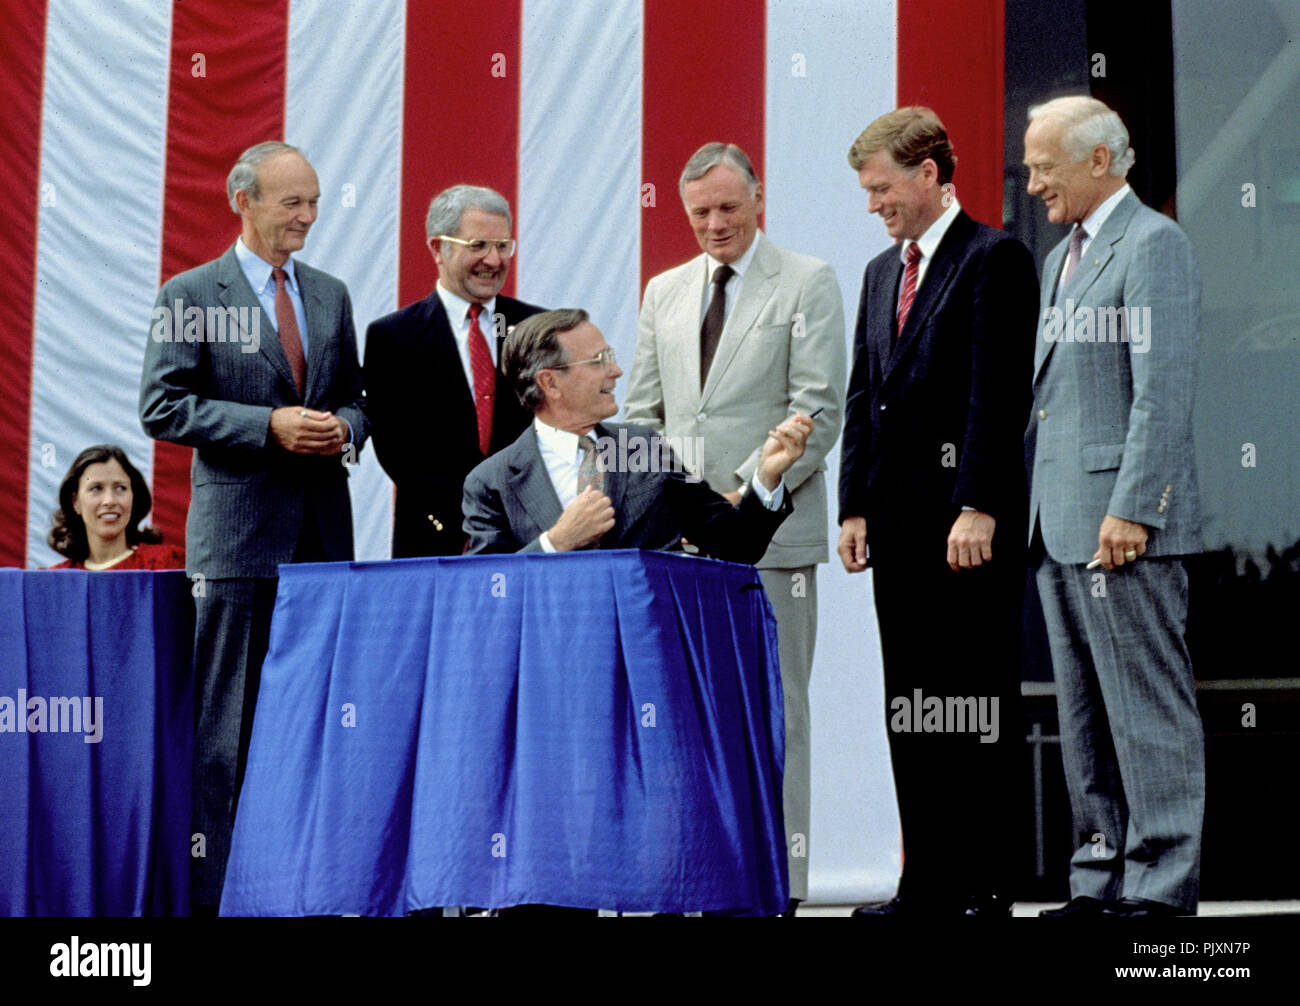 United States President George H.W. Bush signs a proclamation after announcing plans for the Space Exploration Initiative (SEI) on the the 20th anniversary of the Apollo 11 Moon landing at the National Air and Space Museum in Washington, D.C. on July 20, 1989.  From left to right: Marilyn Quayle (seated); Apollo 11 Command Module pilot Michael Collins; NASA Administrator Richard H. Truly; President Bush; Apollo 11 Command pilot Neil A. Armstrong; U.S. Vice President Dan Quayle; and Apollo 11 Lunar Module pilot Edwin (Buzz) Aldrin. Credit: Robert Trippett / Pool via CNP /MediaPunch Stock Photo